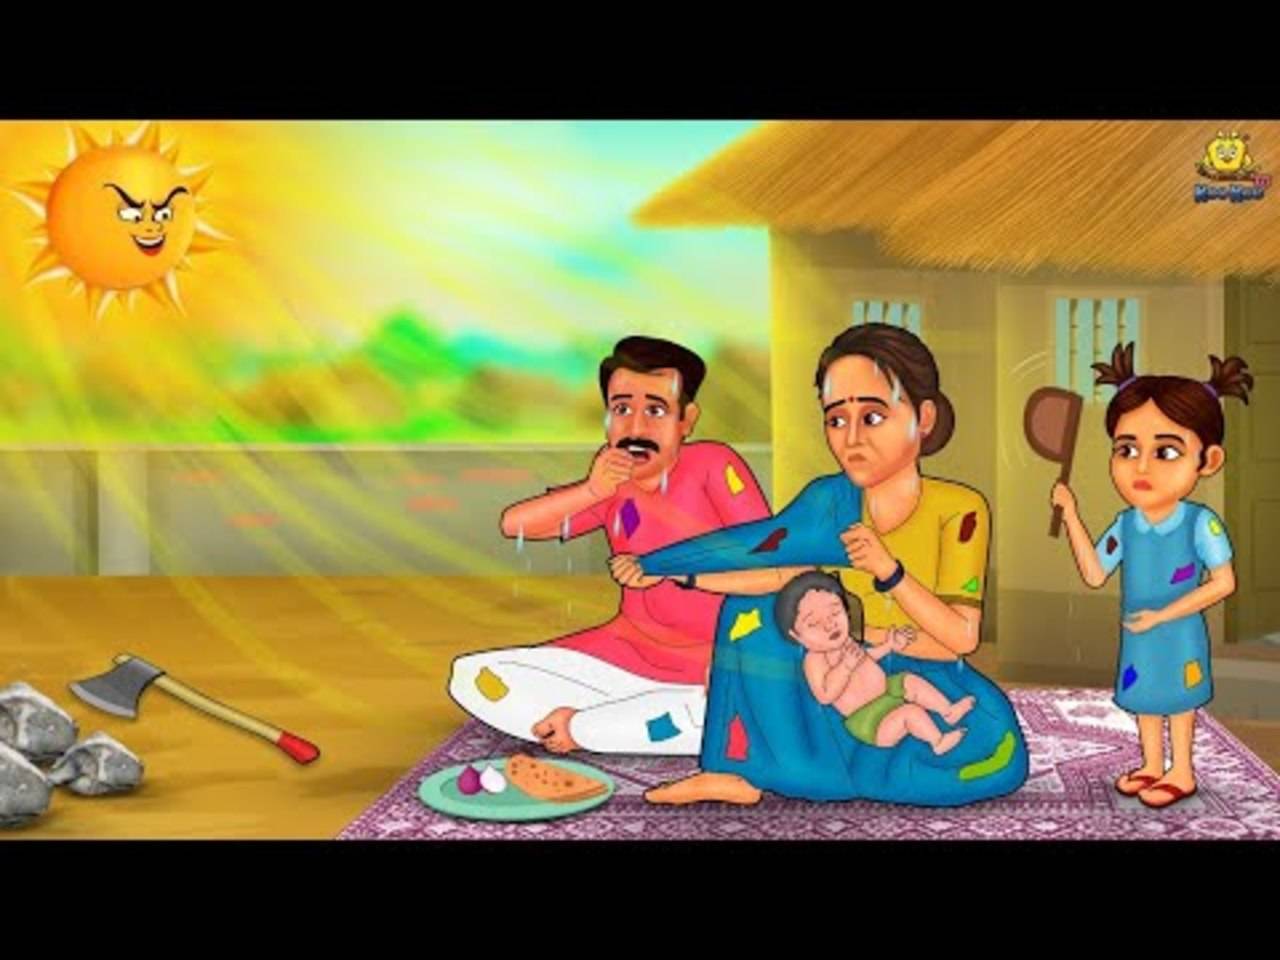 Watch Latest Children Hindi Story 'Amir Vs Garib Ki Garmi' For Kids - Check  Out Kids's Nursery Rhymes And Baby Songs In Hindi | Entertainment - Times  of India Videos